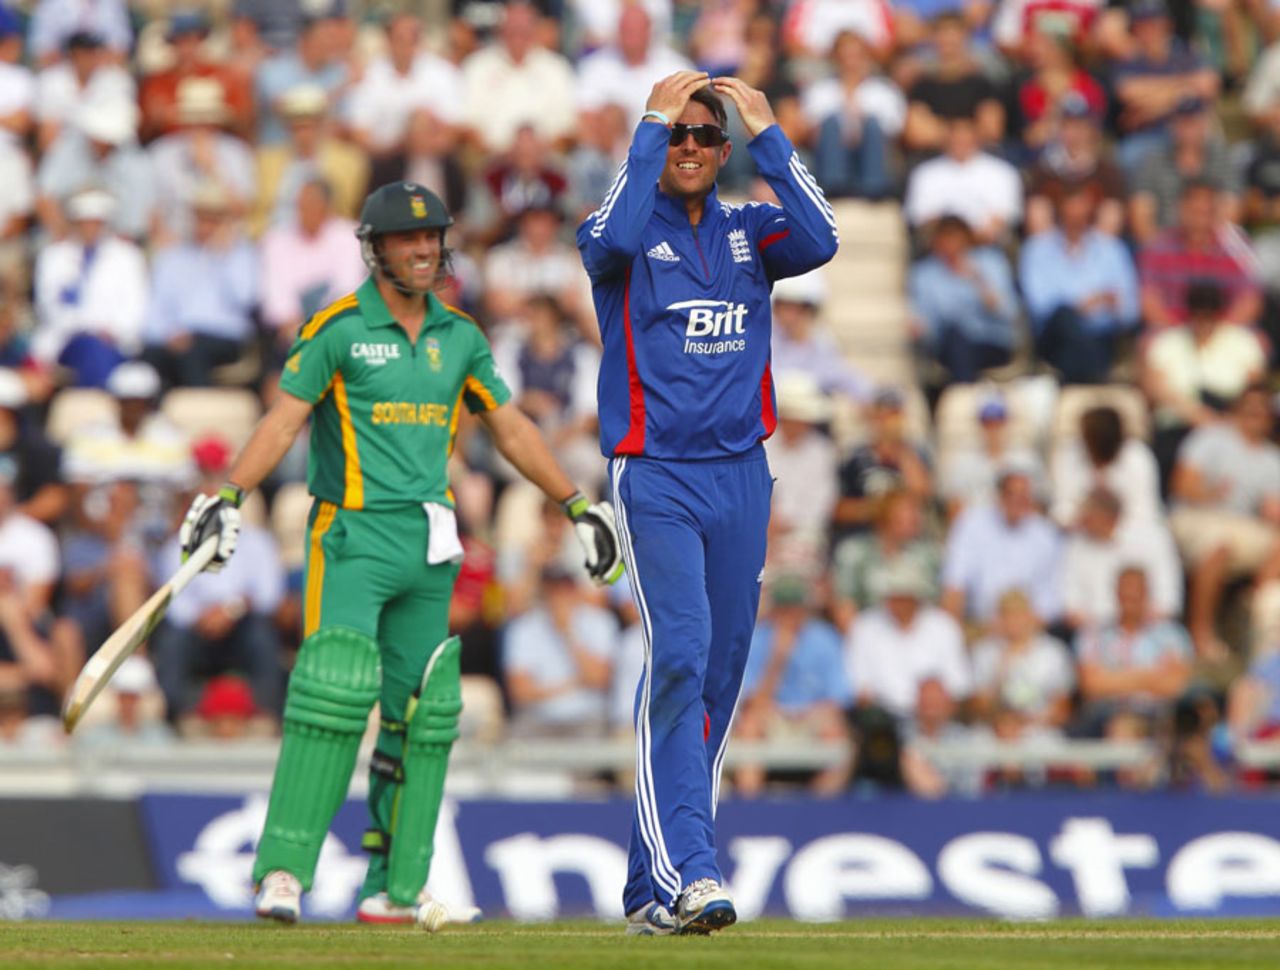 Graeme Swann reacts with dismay after AB de Villiers is given not out caught behind, England v South Africa, 2nd NatWest ODI, West End, August 28, 2012